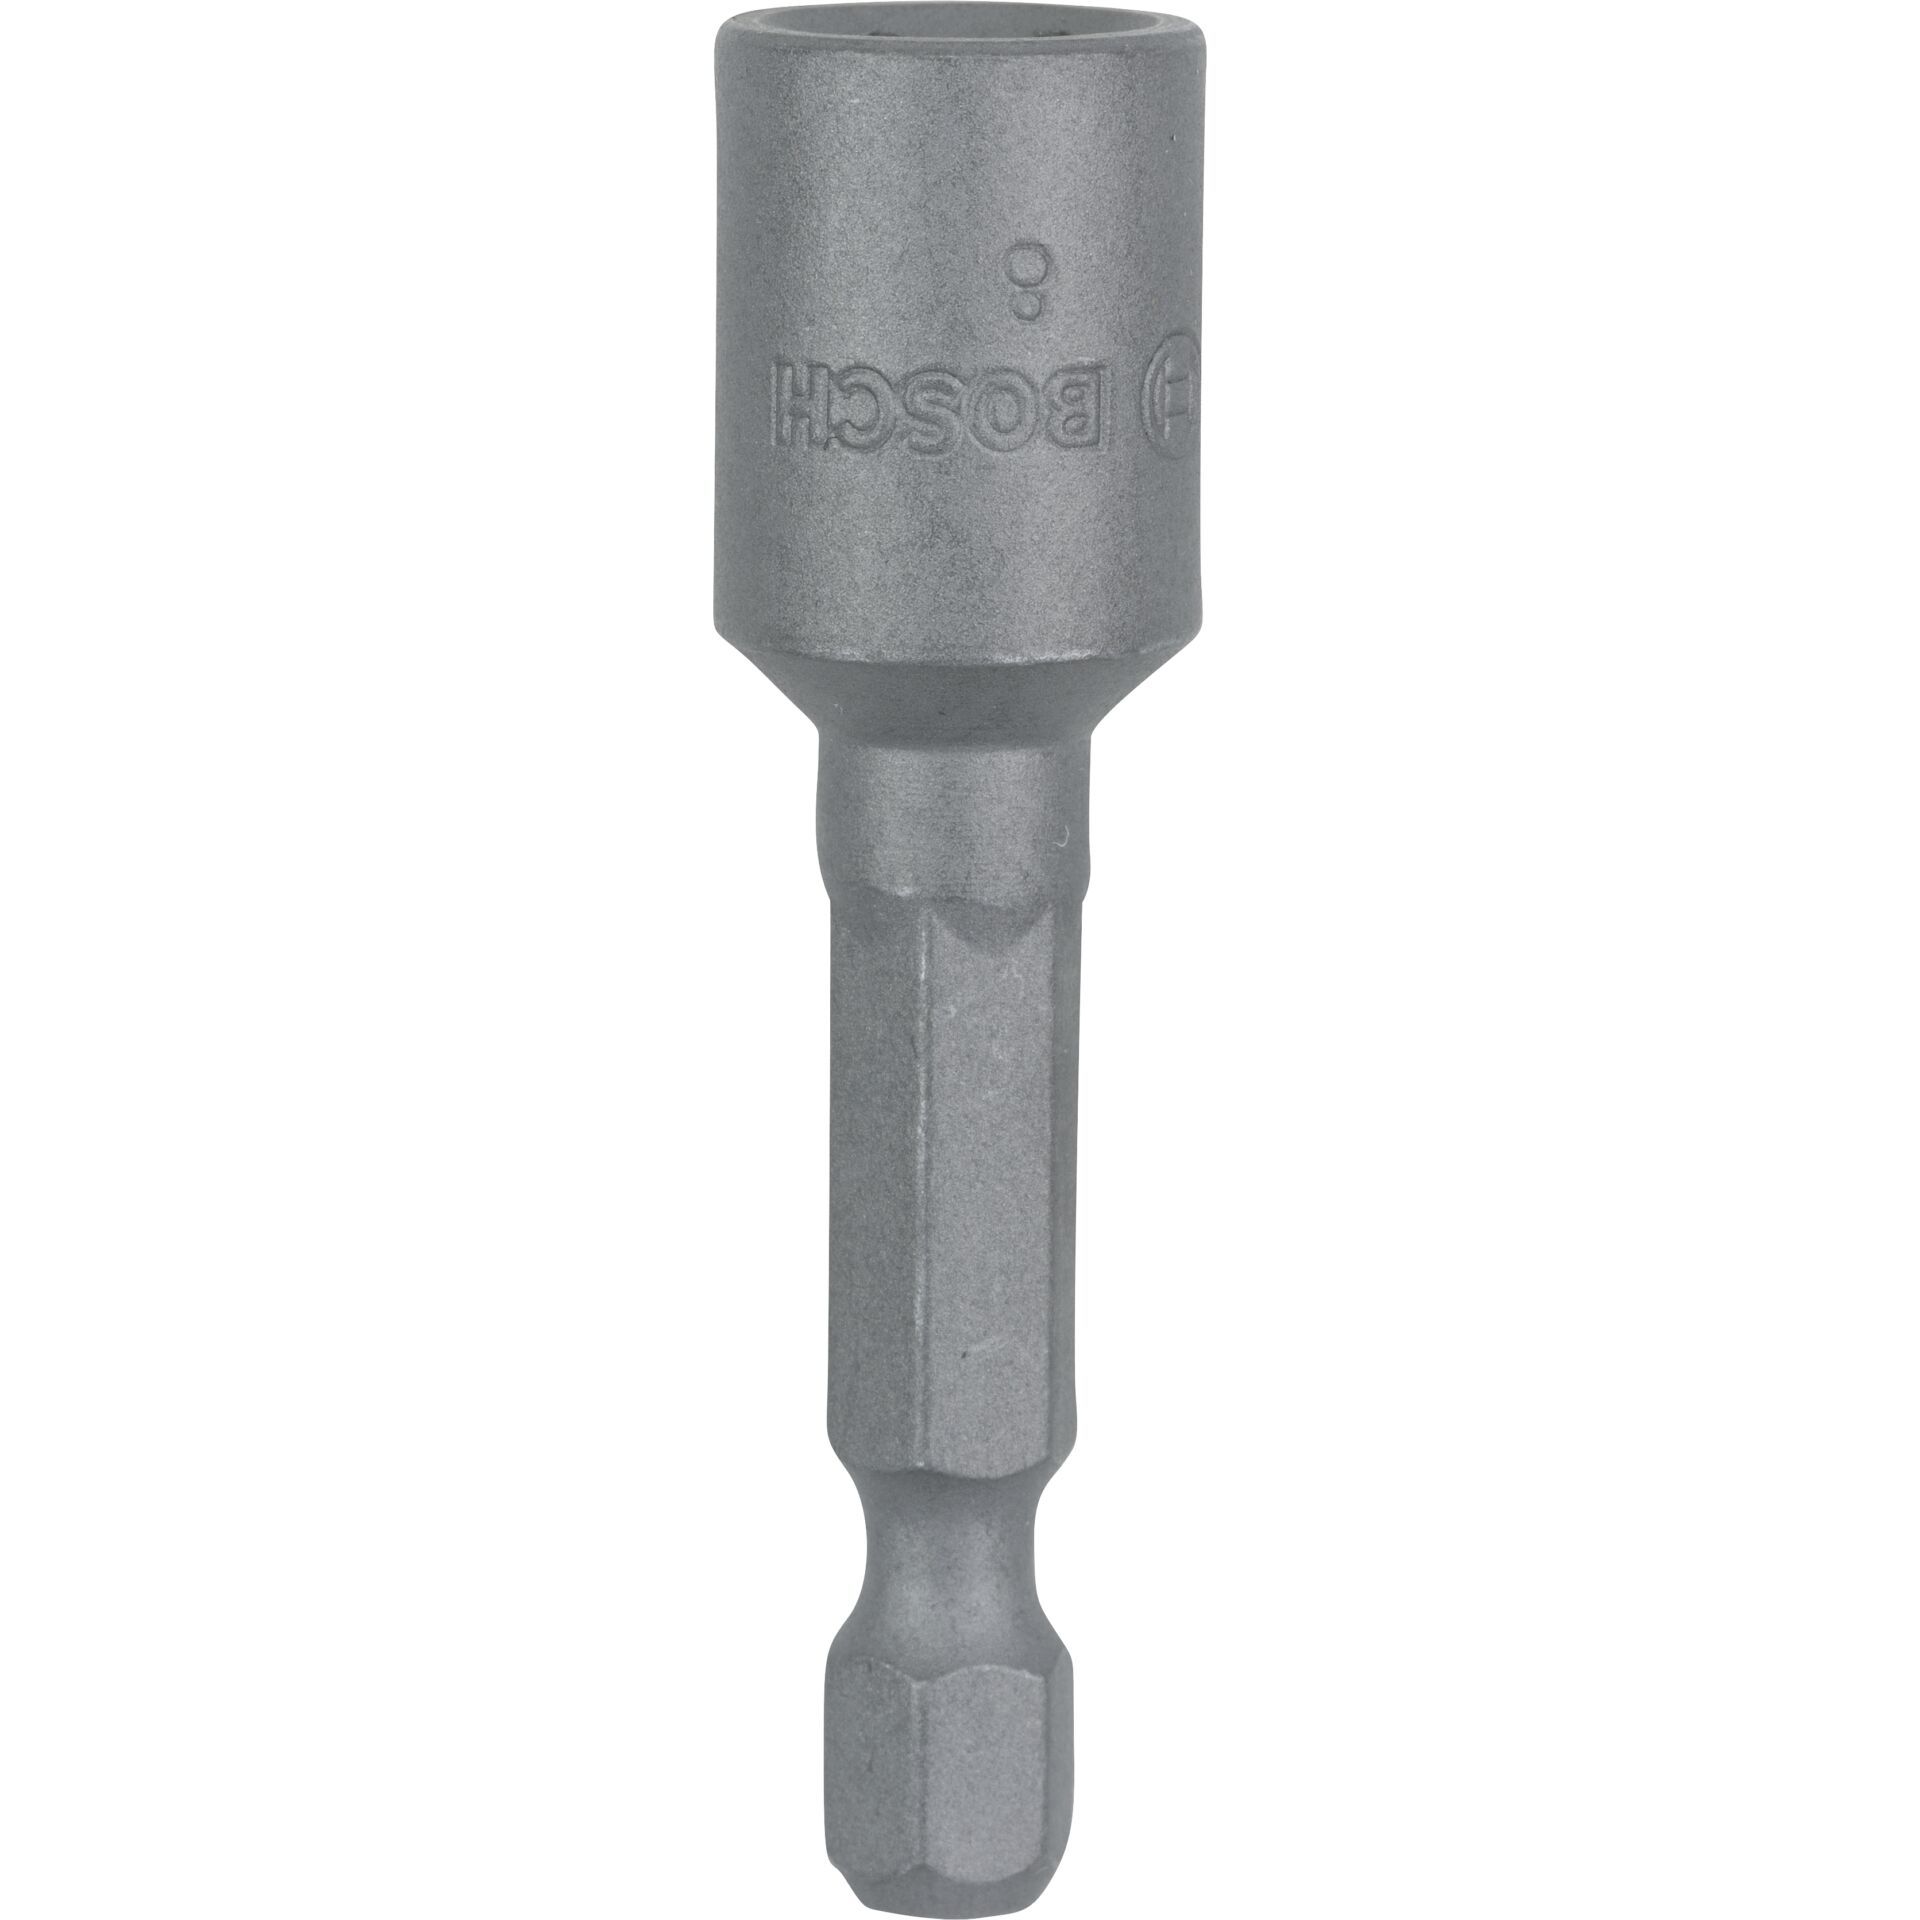 Bosch Extra Hard Nutsetter 50mm SW 8,0 with Magnet